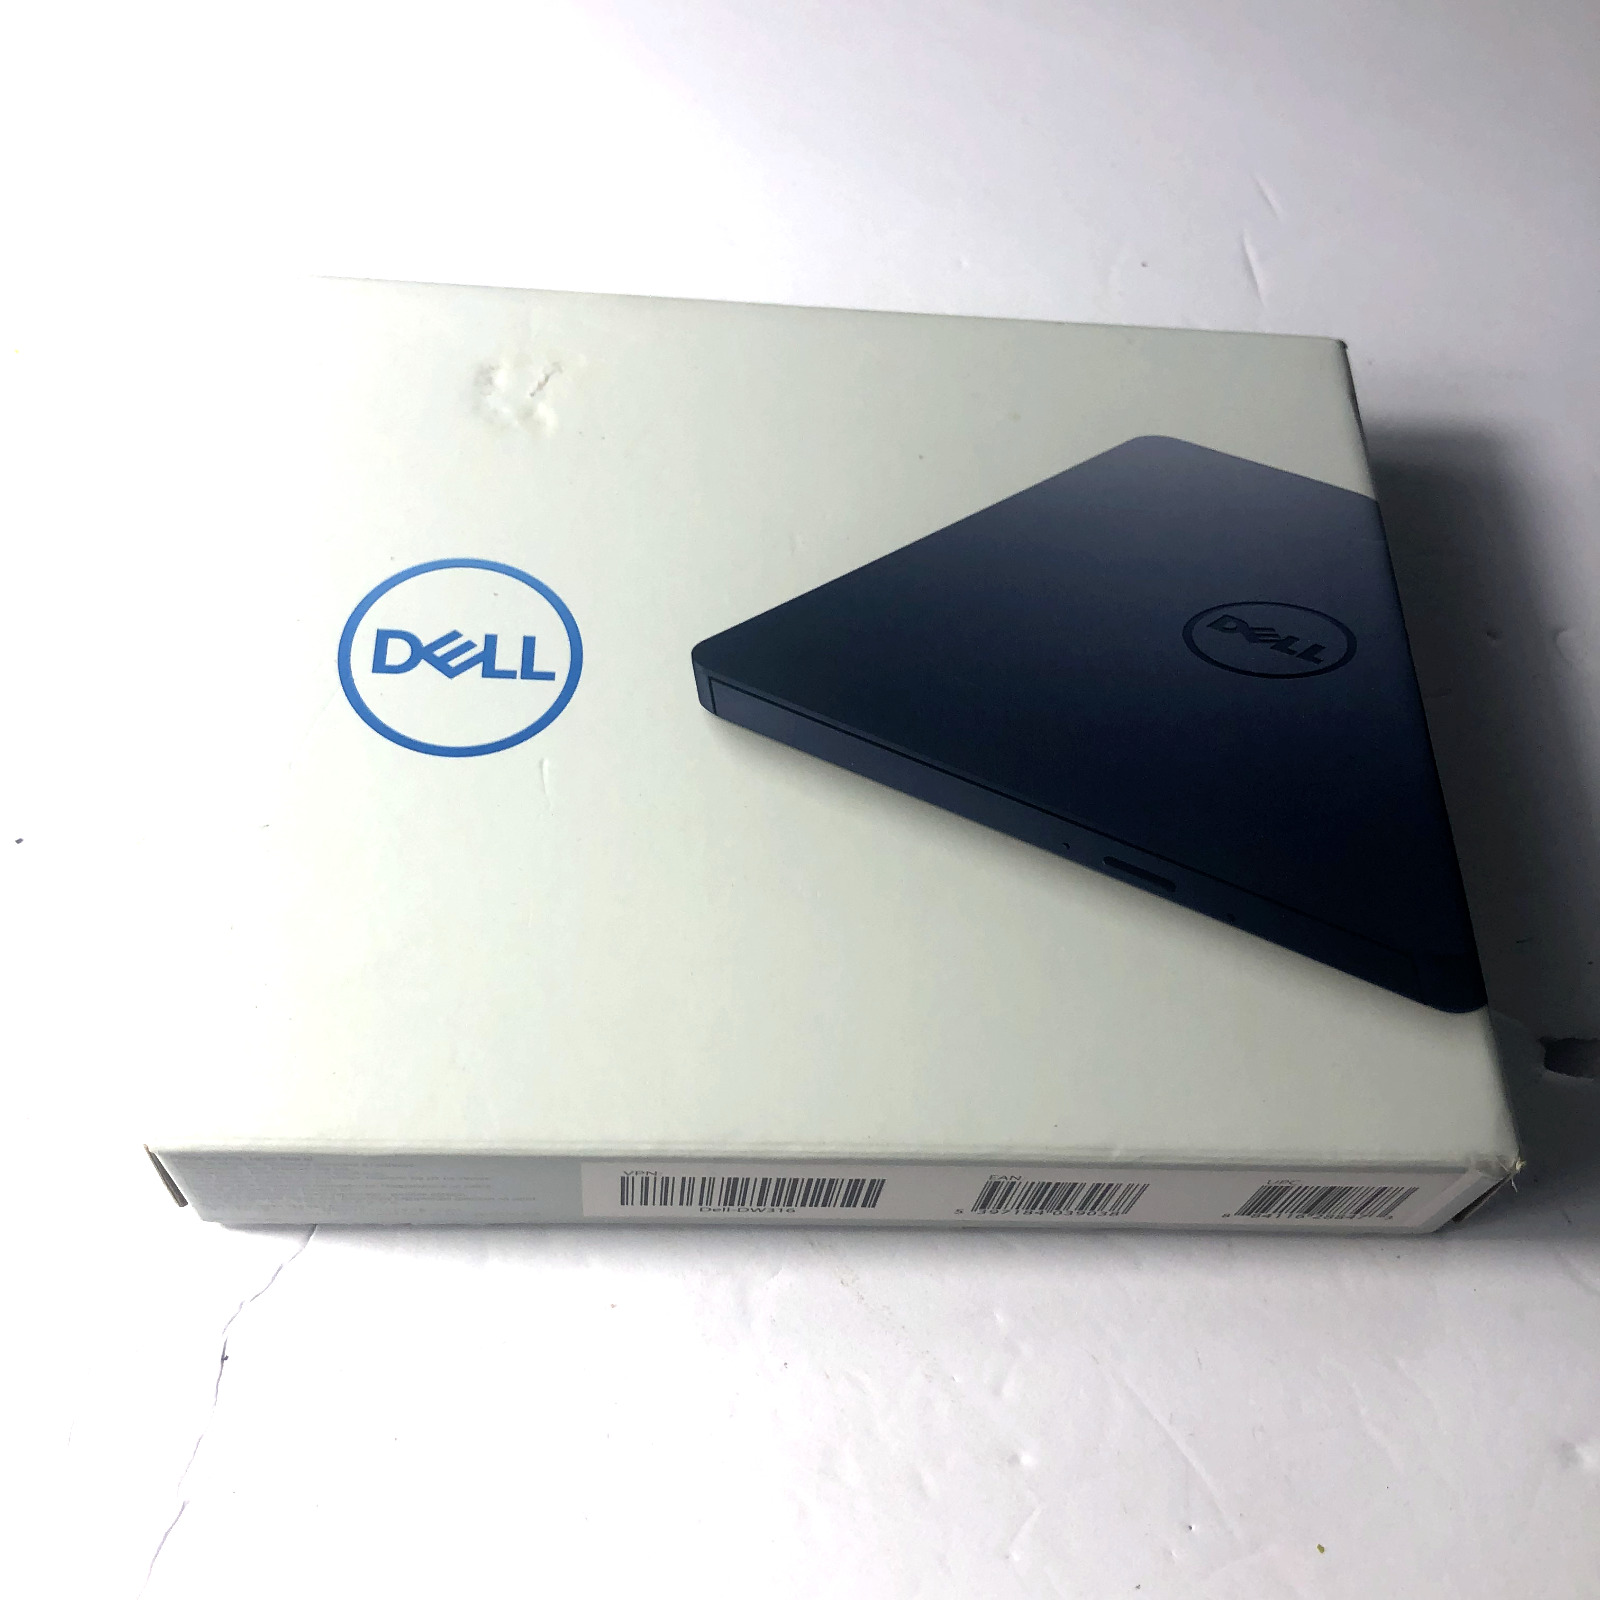 DELL External USB Slim DVD/RW Optical Drive DW316 with manual and box